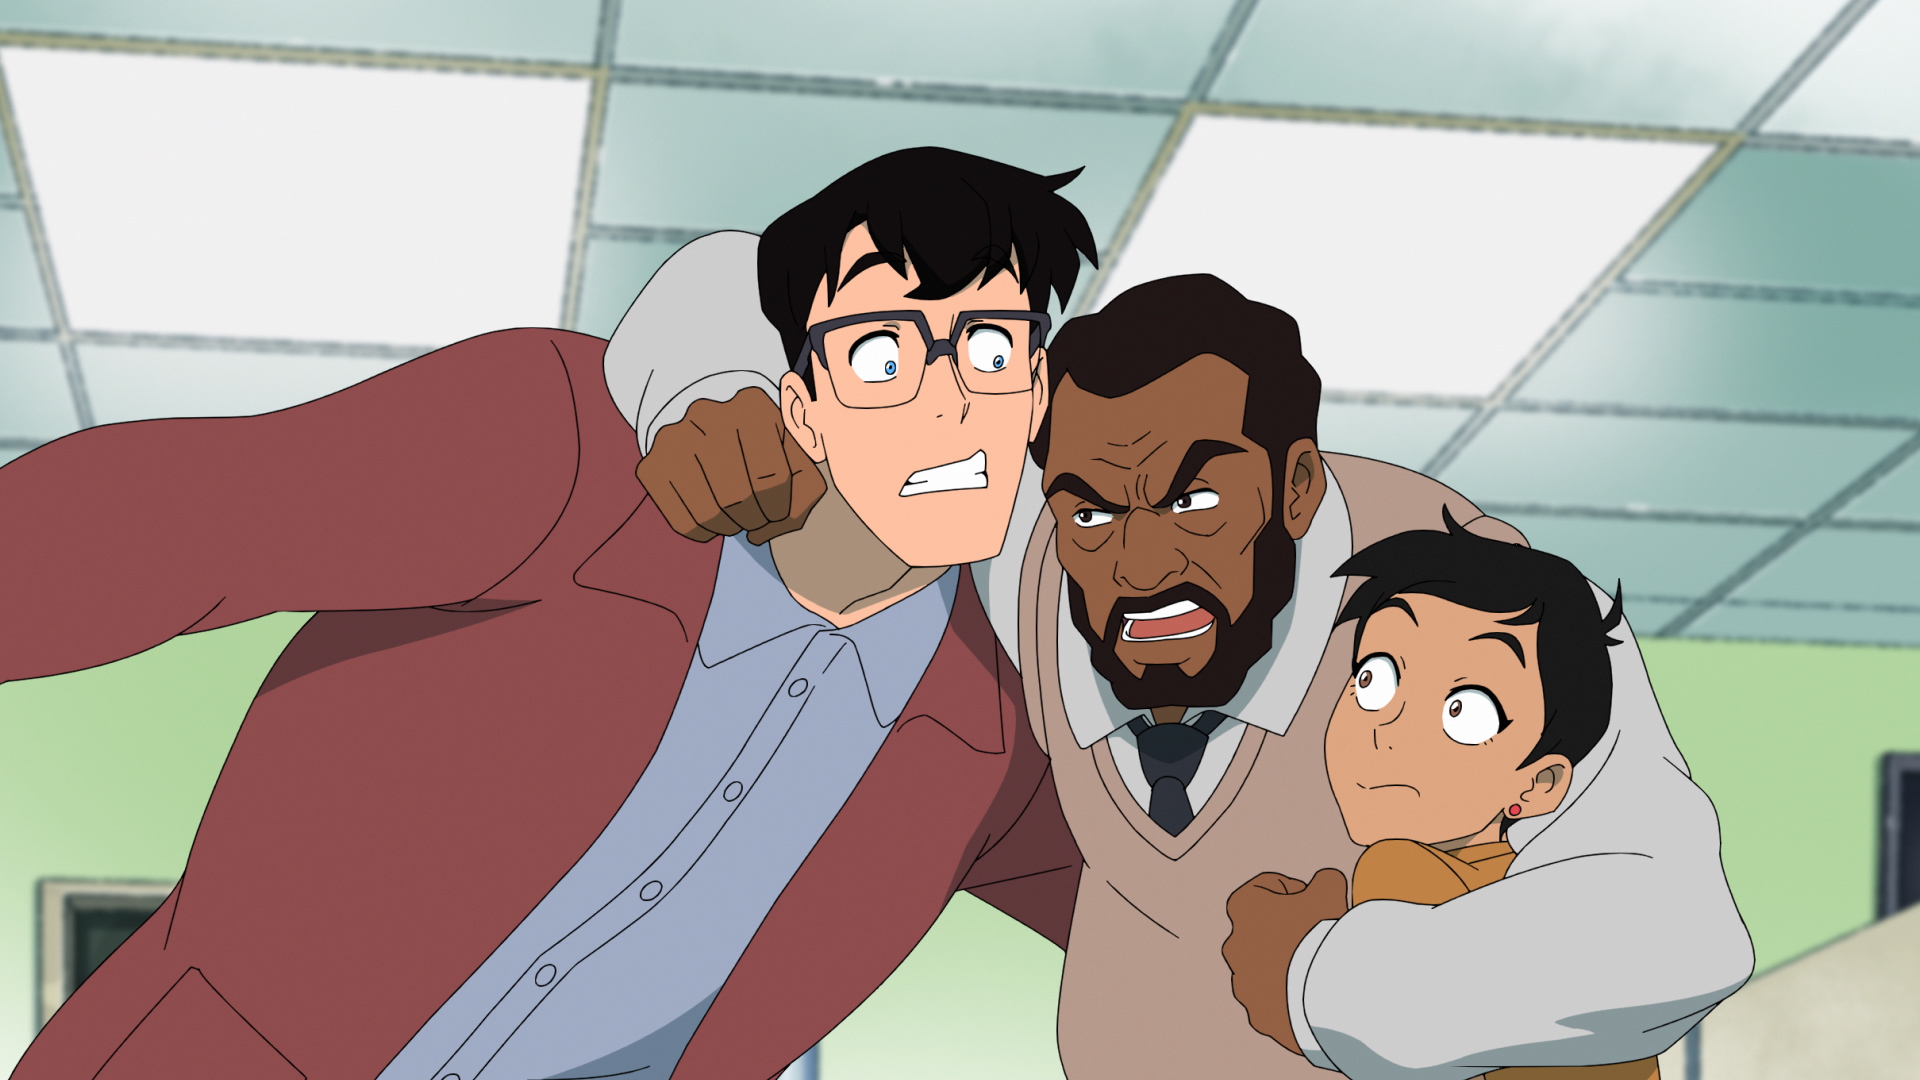 Jack Quaid as Clark Kent, Darrell Brown as Perry White, and Alice Lee as Lois Lane in Jake Wyatt, Brendan Clougher, and Josie Campbell's action-adventure animated series, My Adventures with Superman Season 2 Episode 5